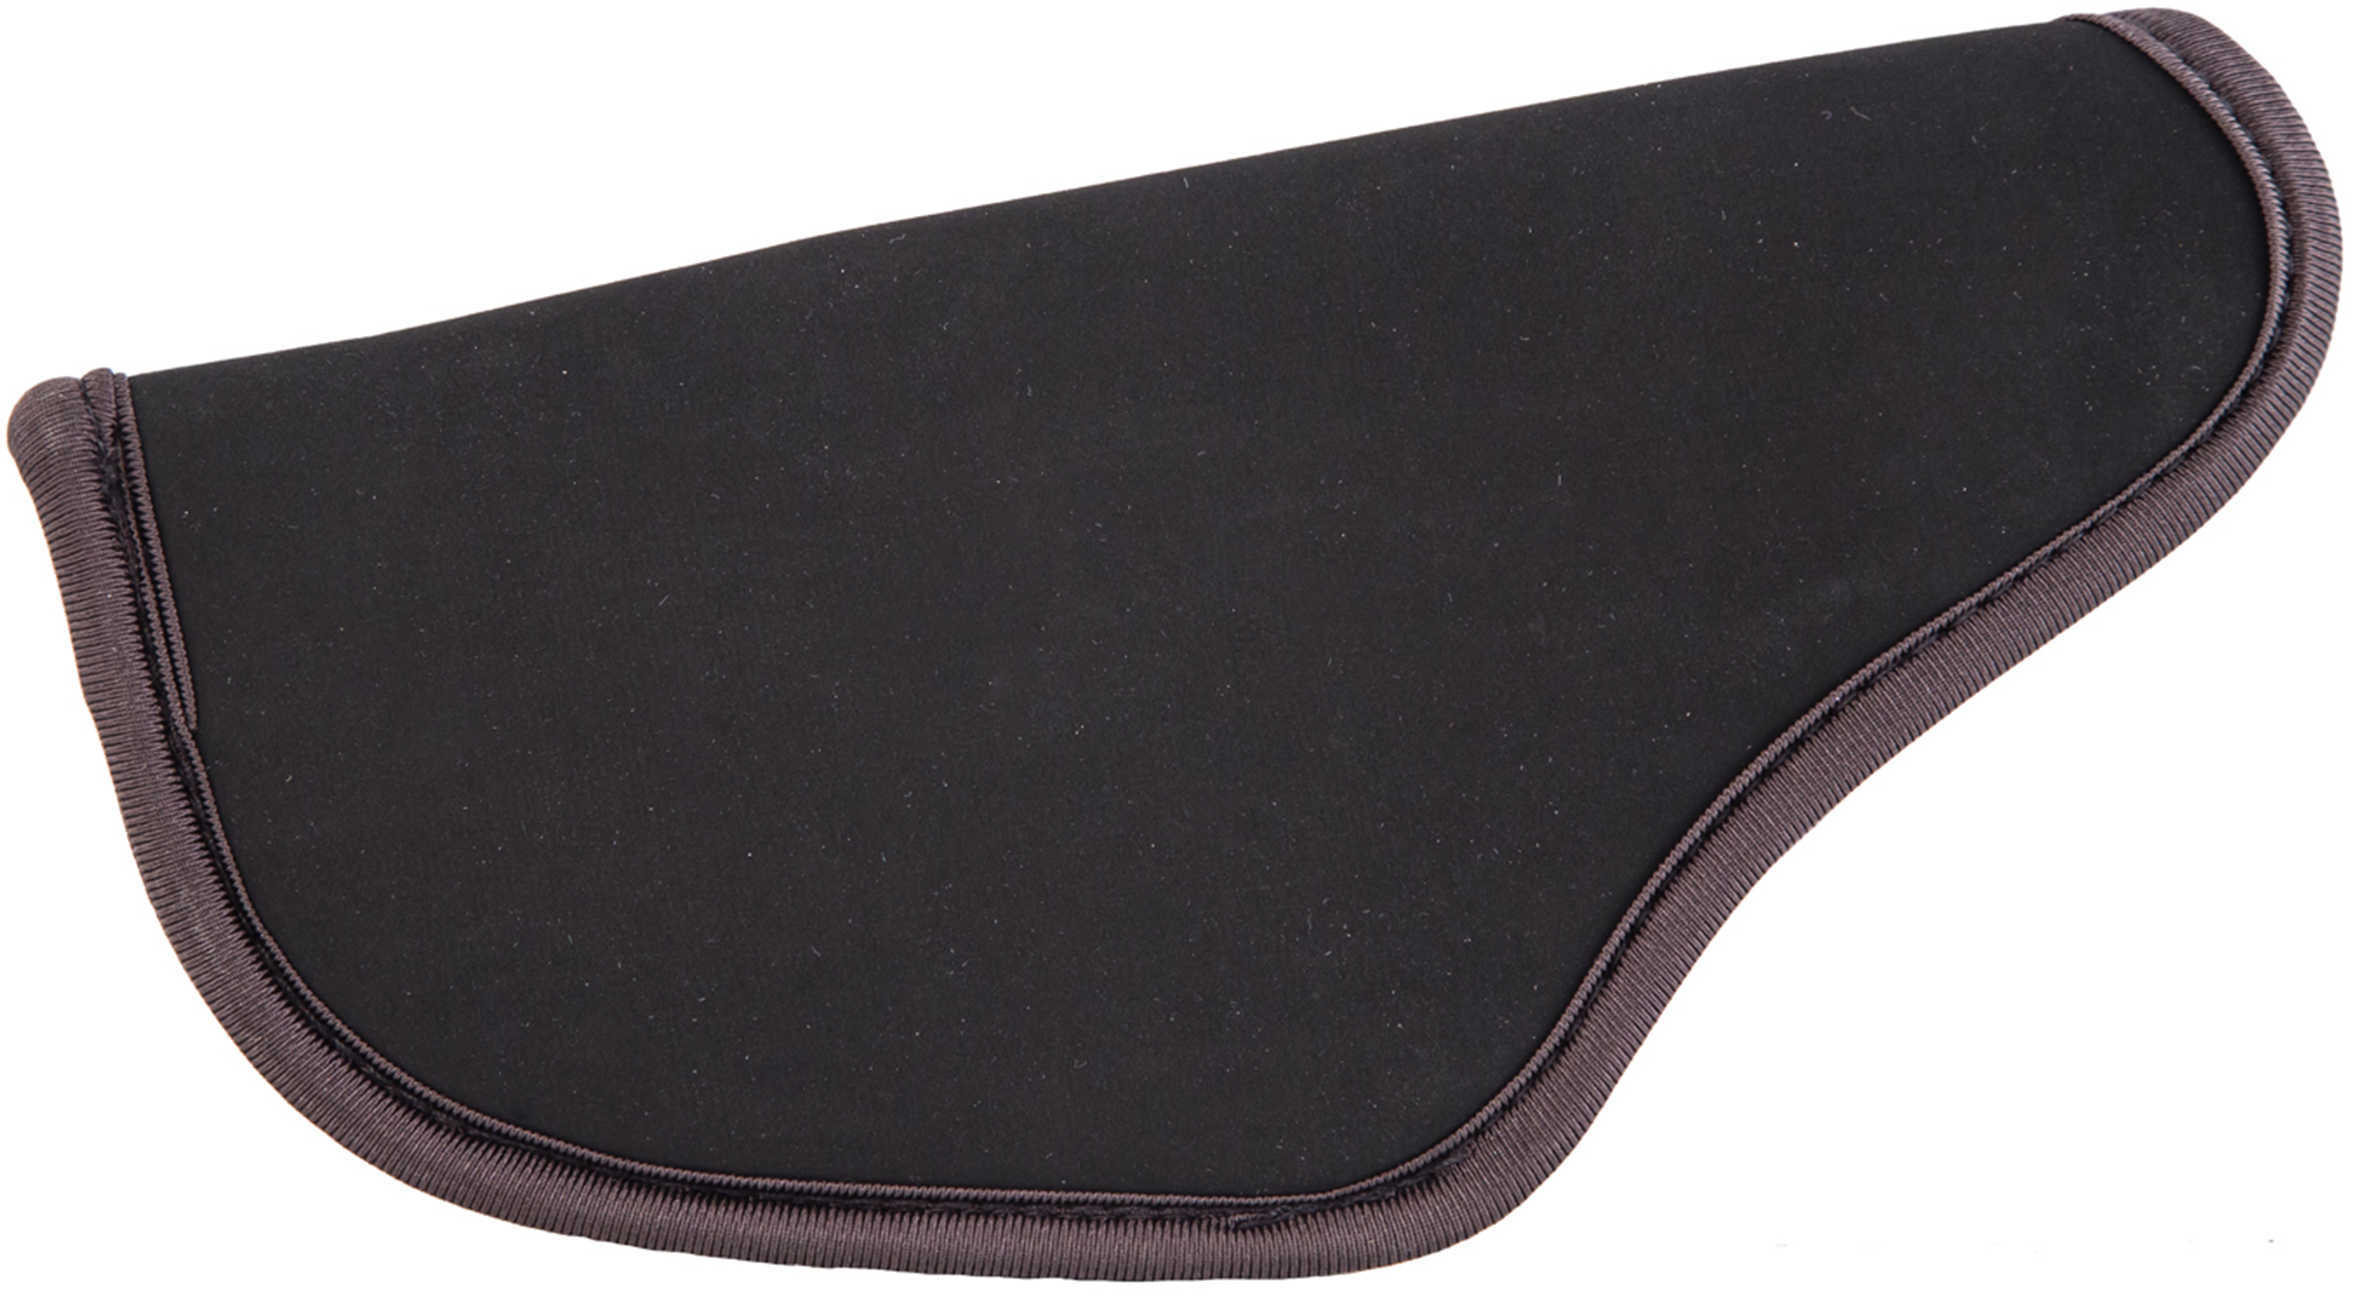 Caldwell Tac Ops IWB Covert Holster .22- 25 Calibers Semi Autos, Right Hand, Black Md: 110083